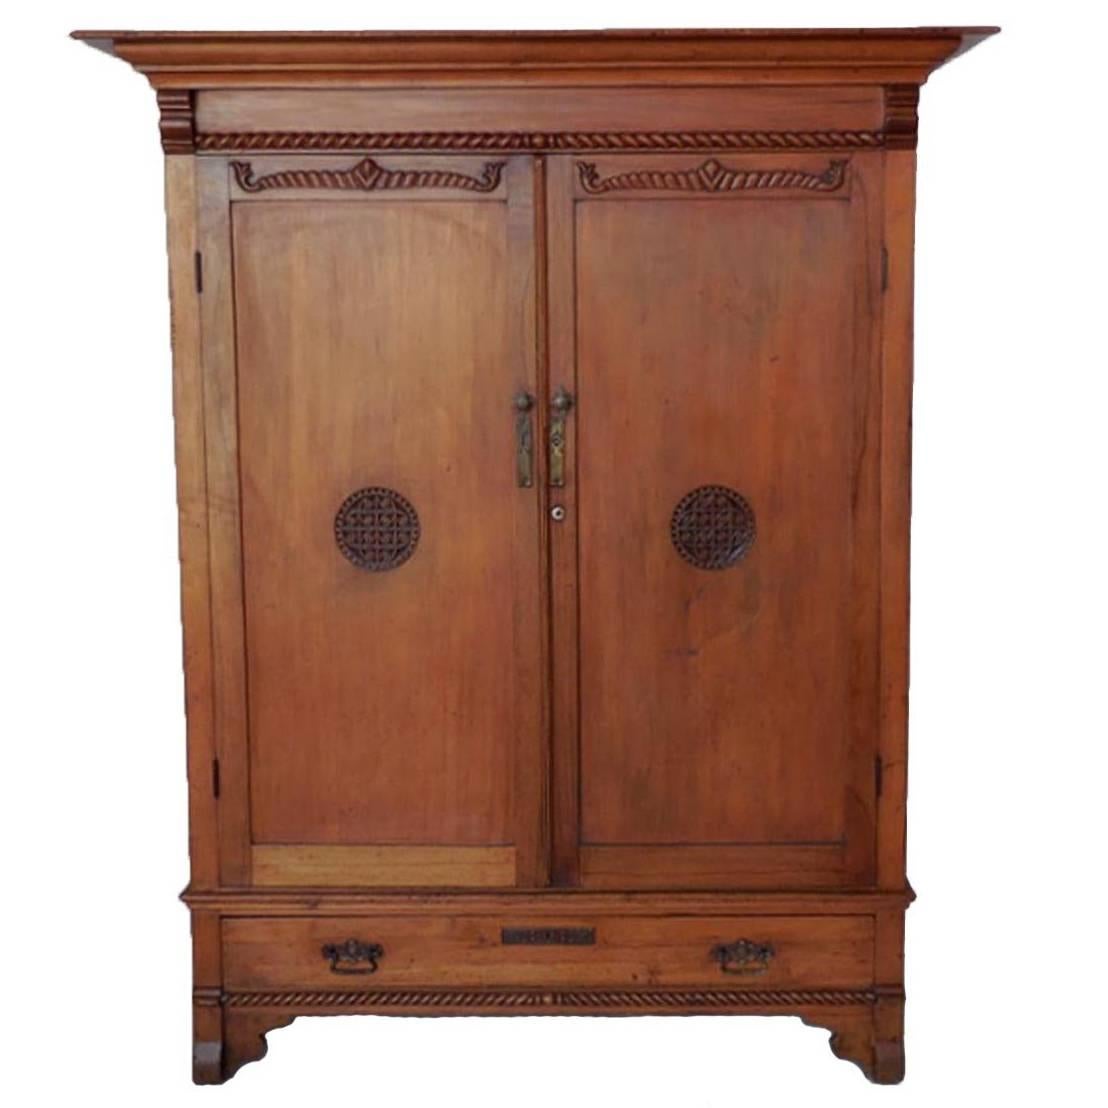 Early 20th Century Guatemalan Cabinet or Wardrobe with Drawers